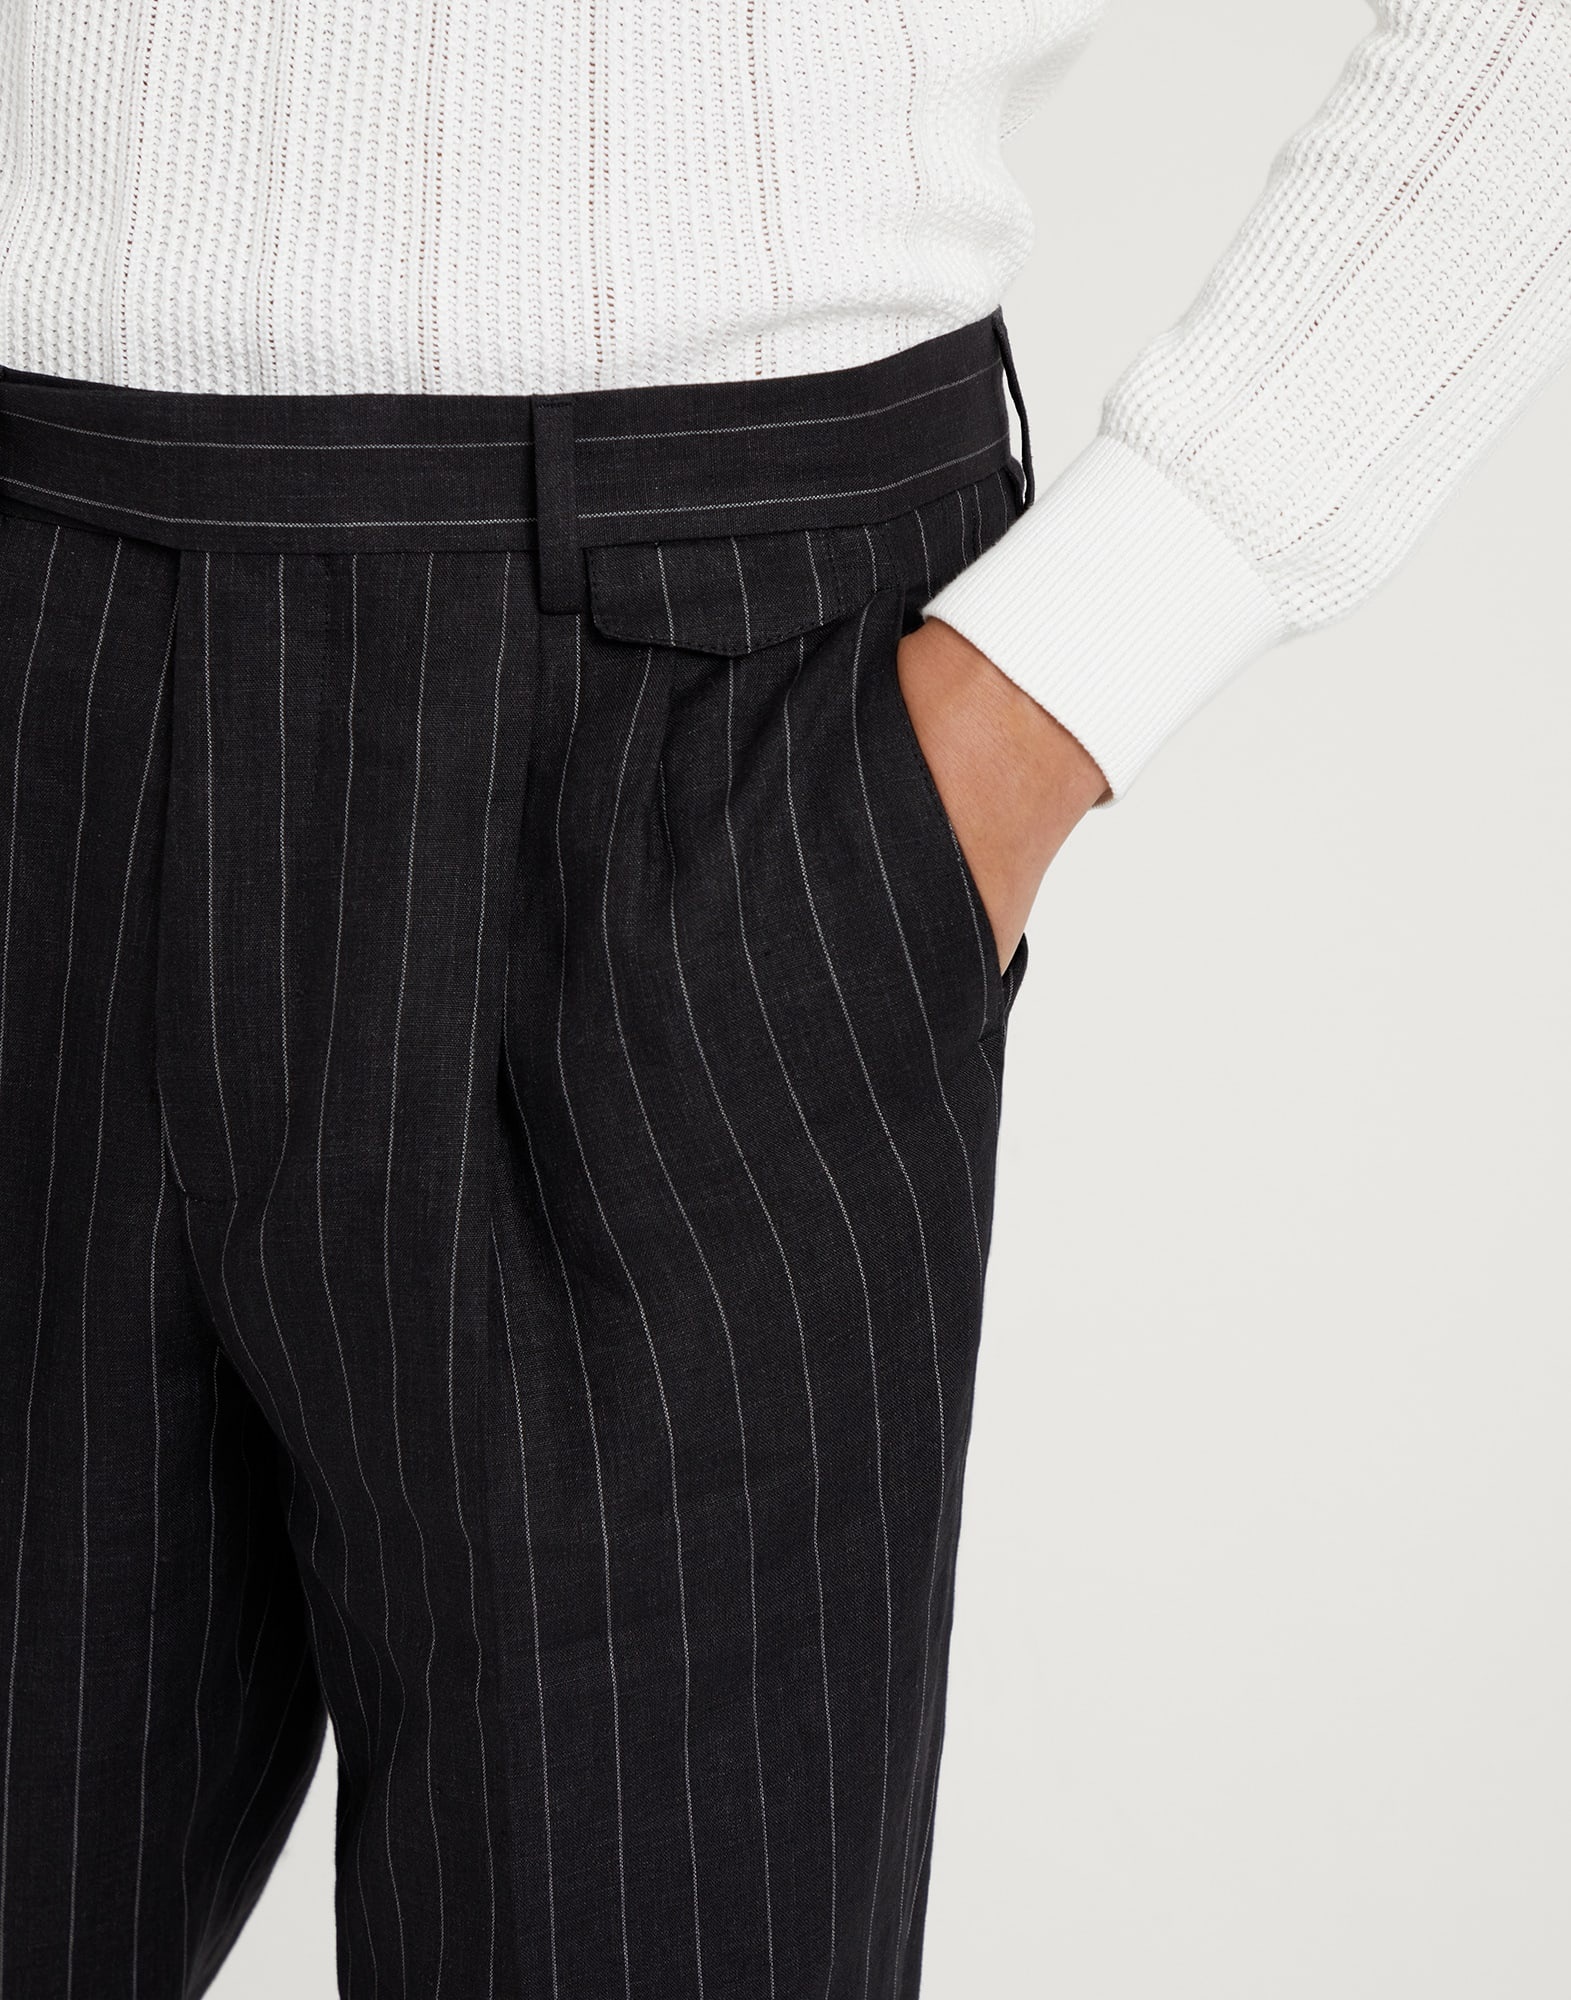 Linen chalk stripe leisure fit trousers with double pleats and tabbed waistband - 3